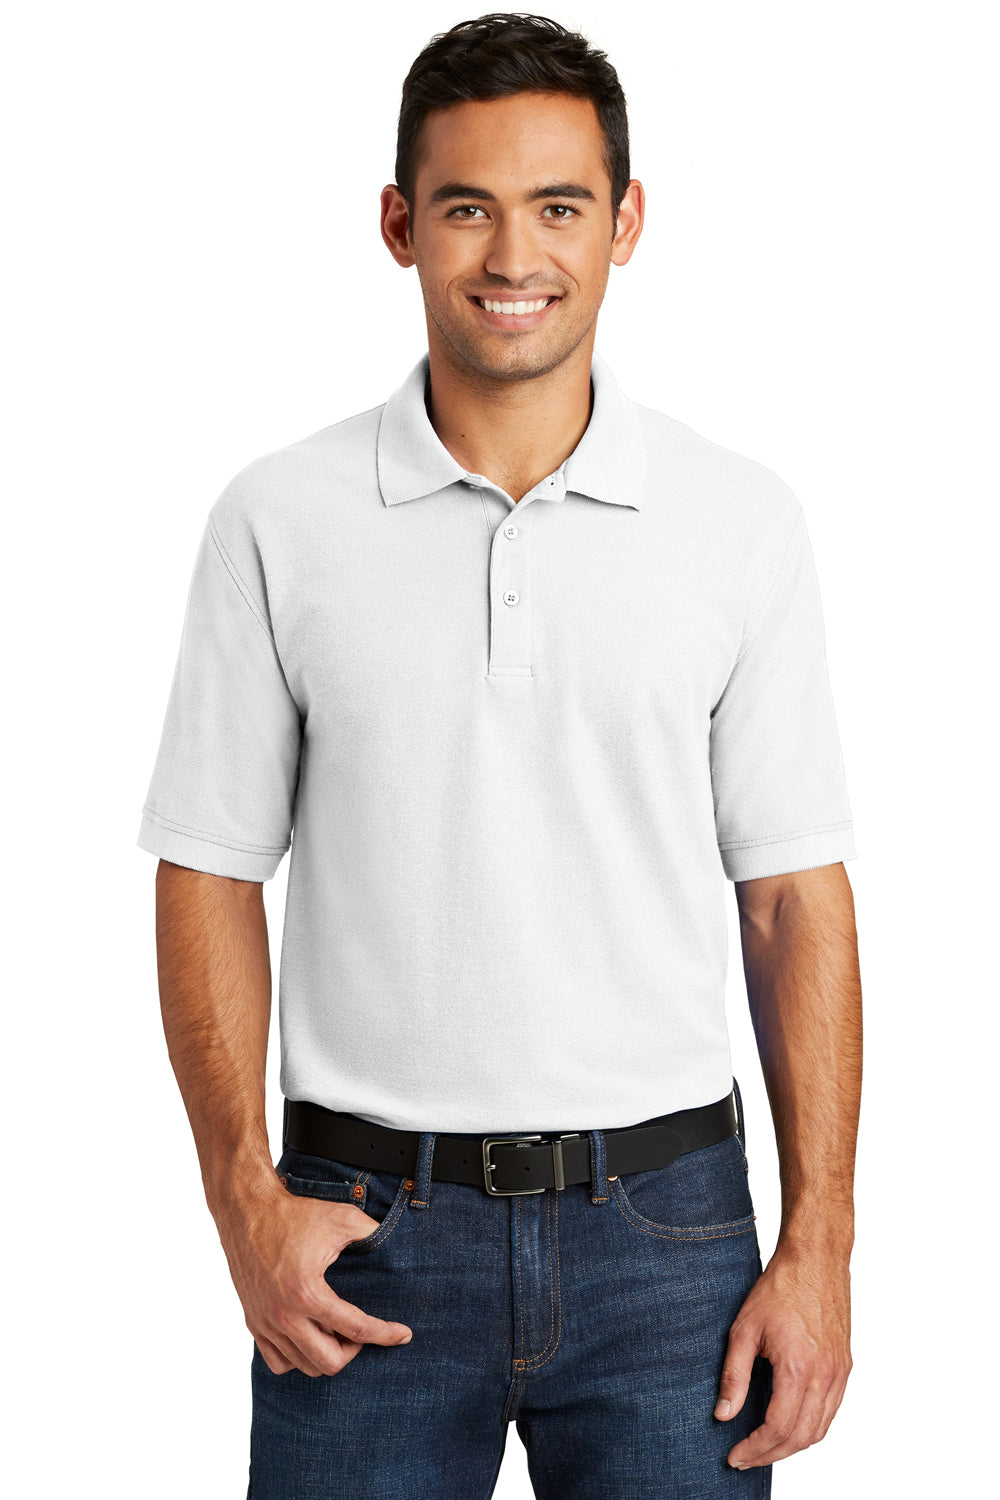 Port & Company KP155 Mens Core Stain Resistant Short Sleeve Polo Shirt White Front